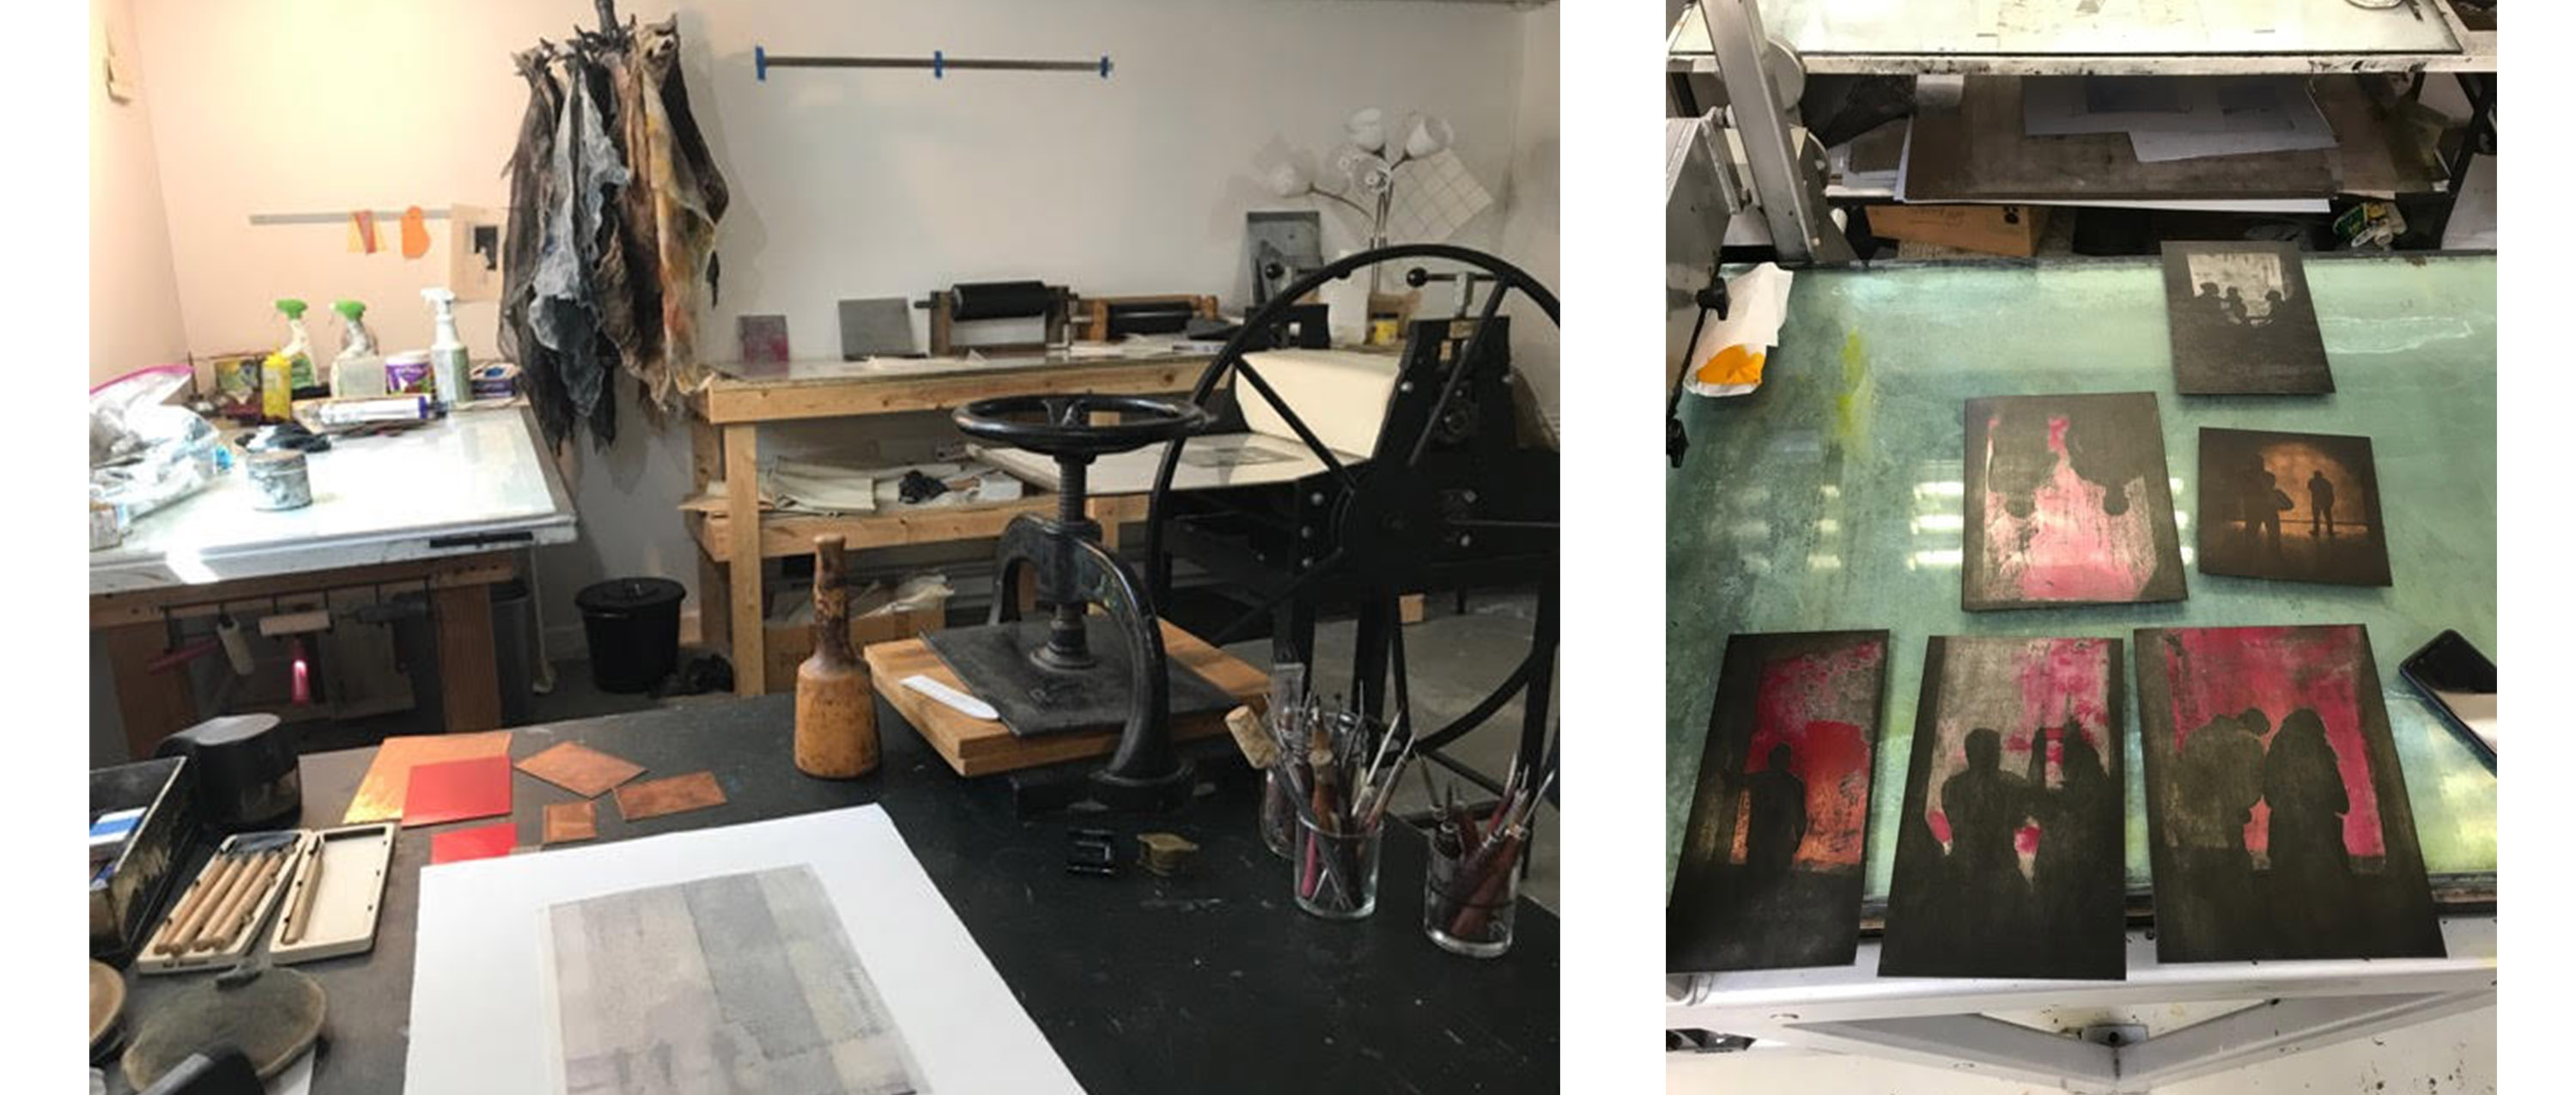 left: a printmaking studio, with three counters covered in supplies and prints in progress. right: five prints of shadows of people against colorful backgrounds, arranged on a green tabletop in a printmaking studio